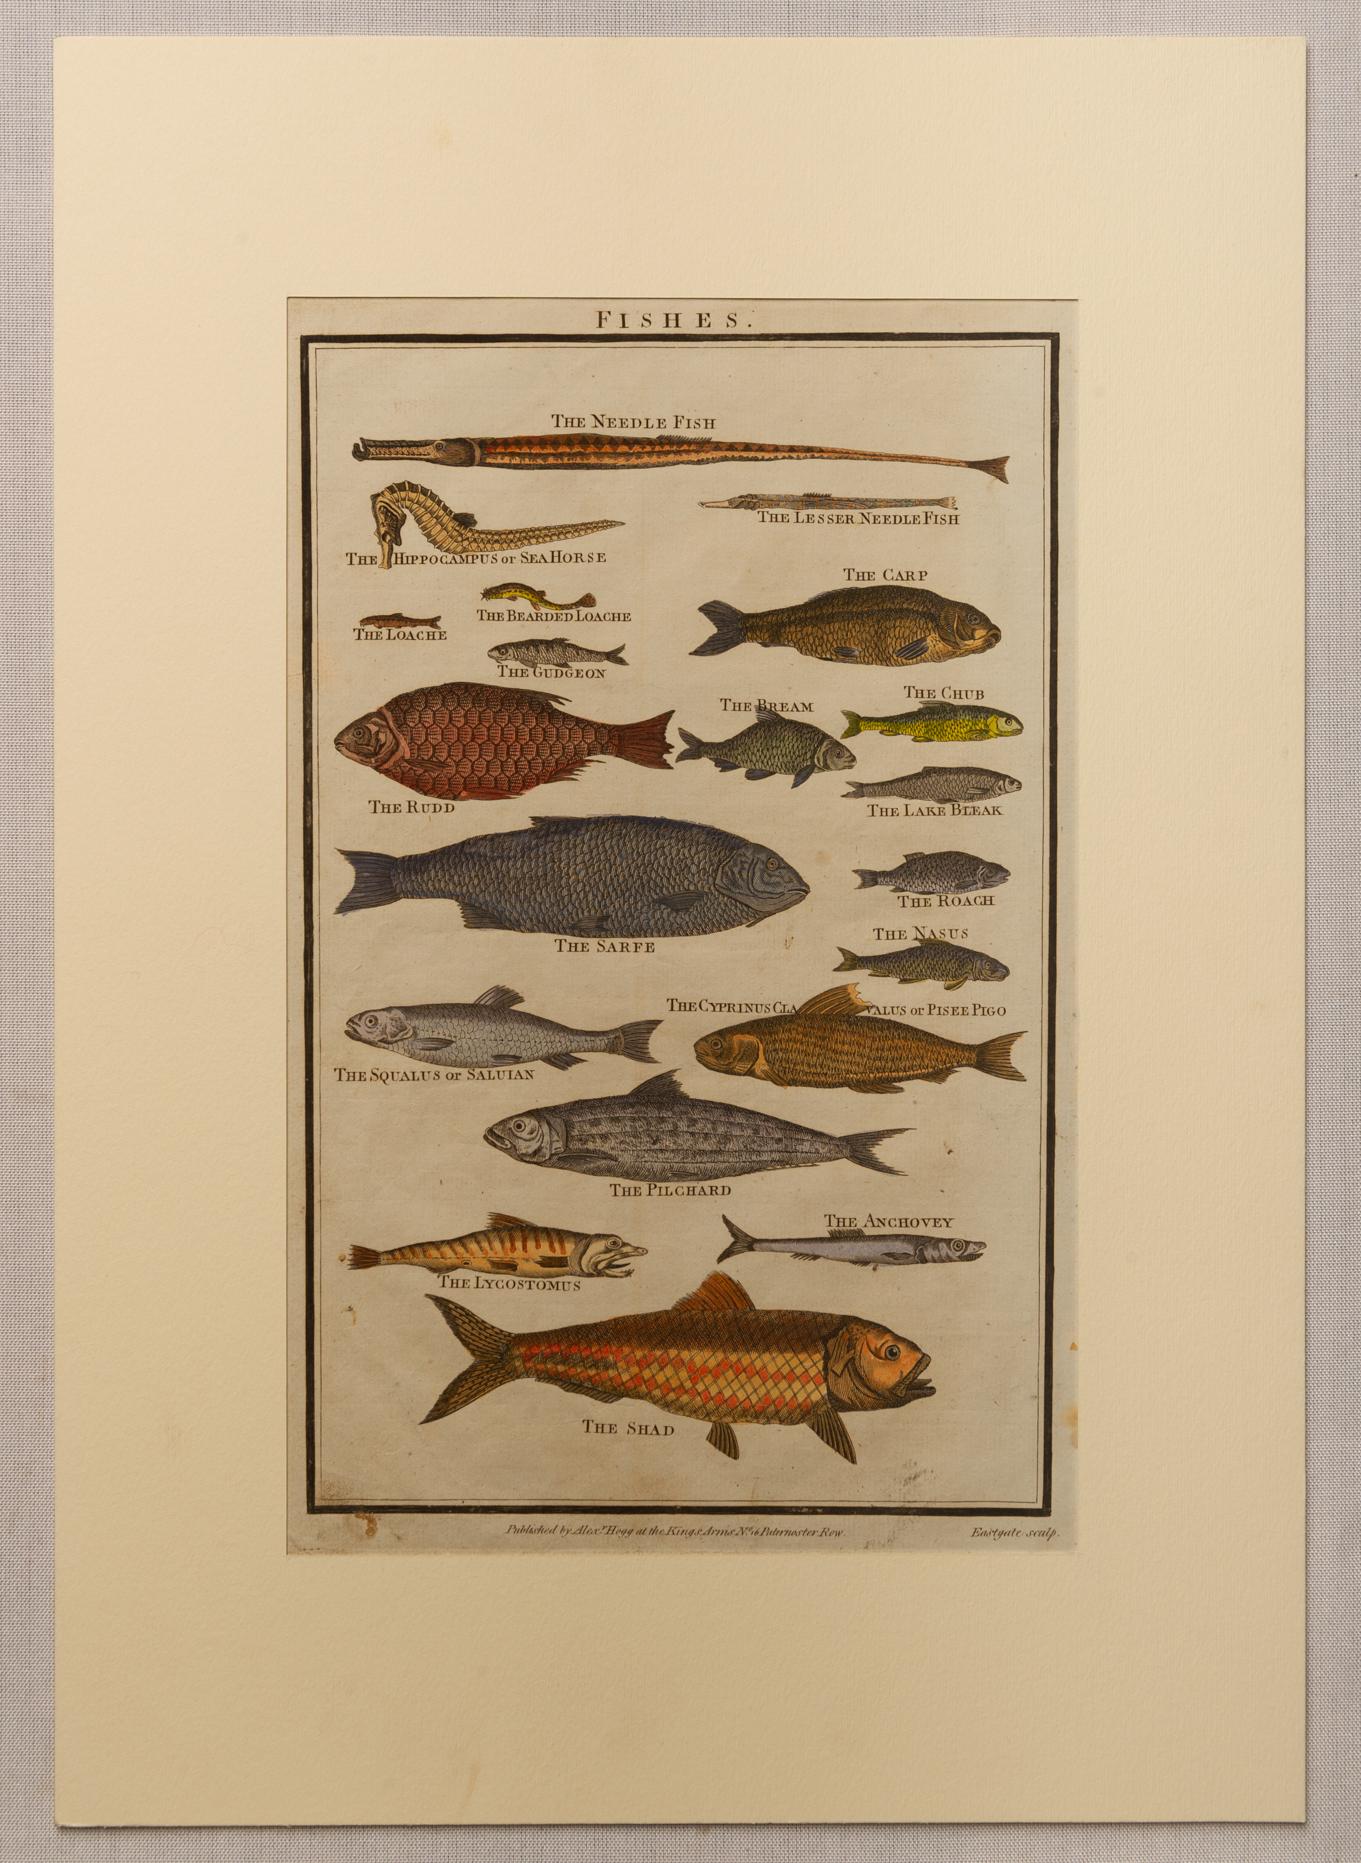 Other Series of English Antique Etchings with Fishes